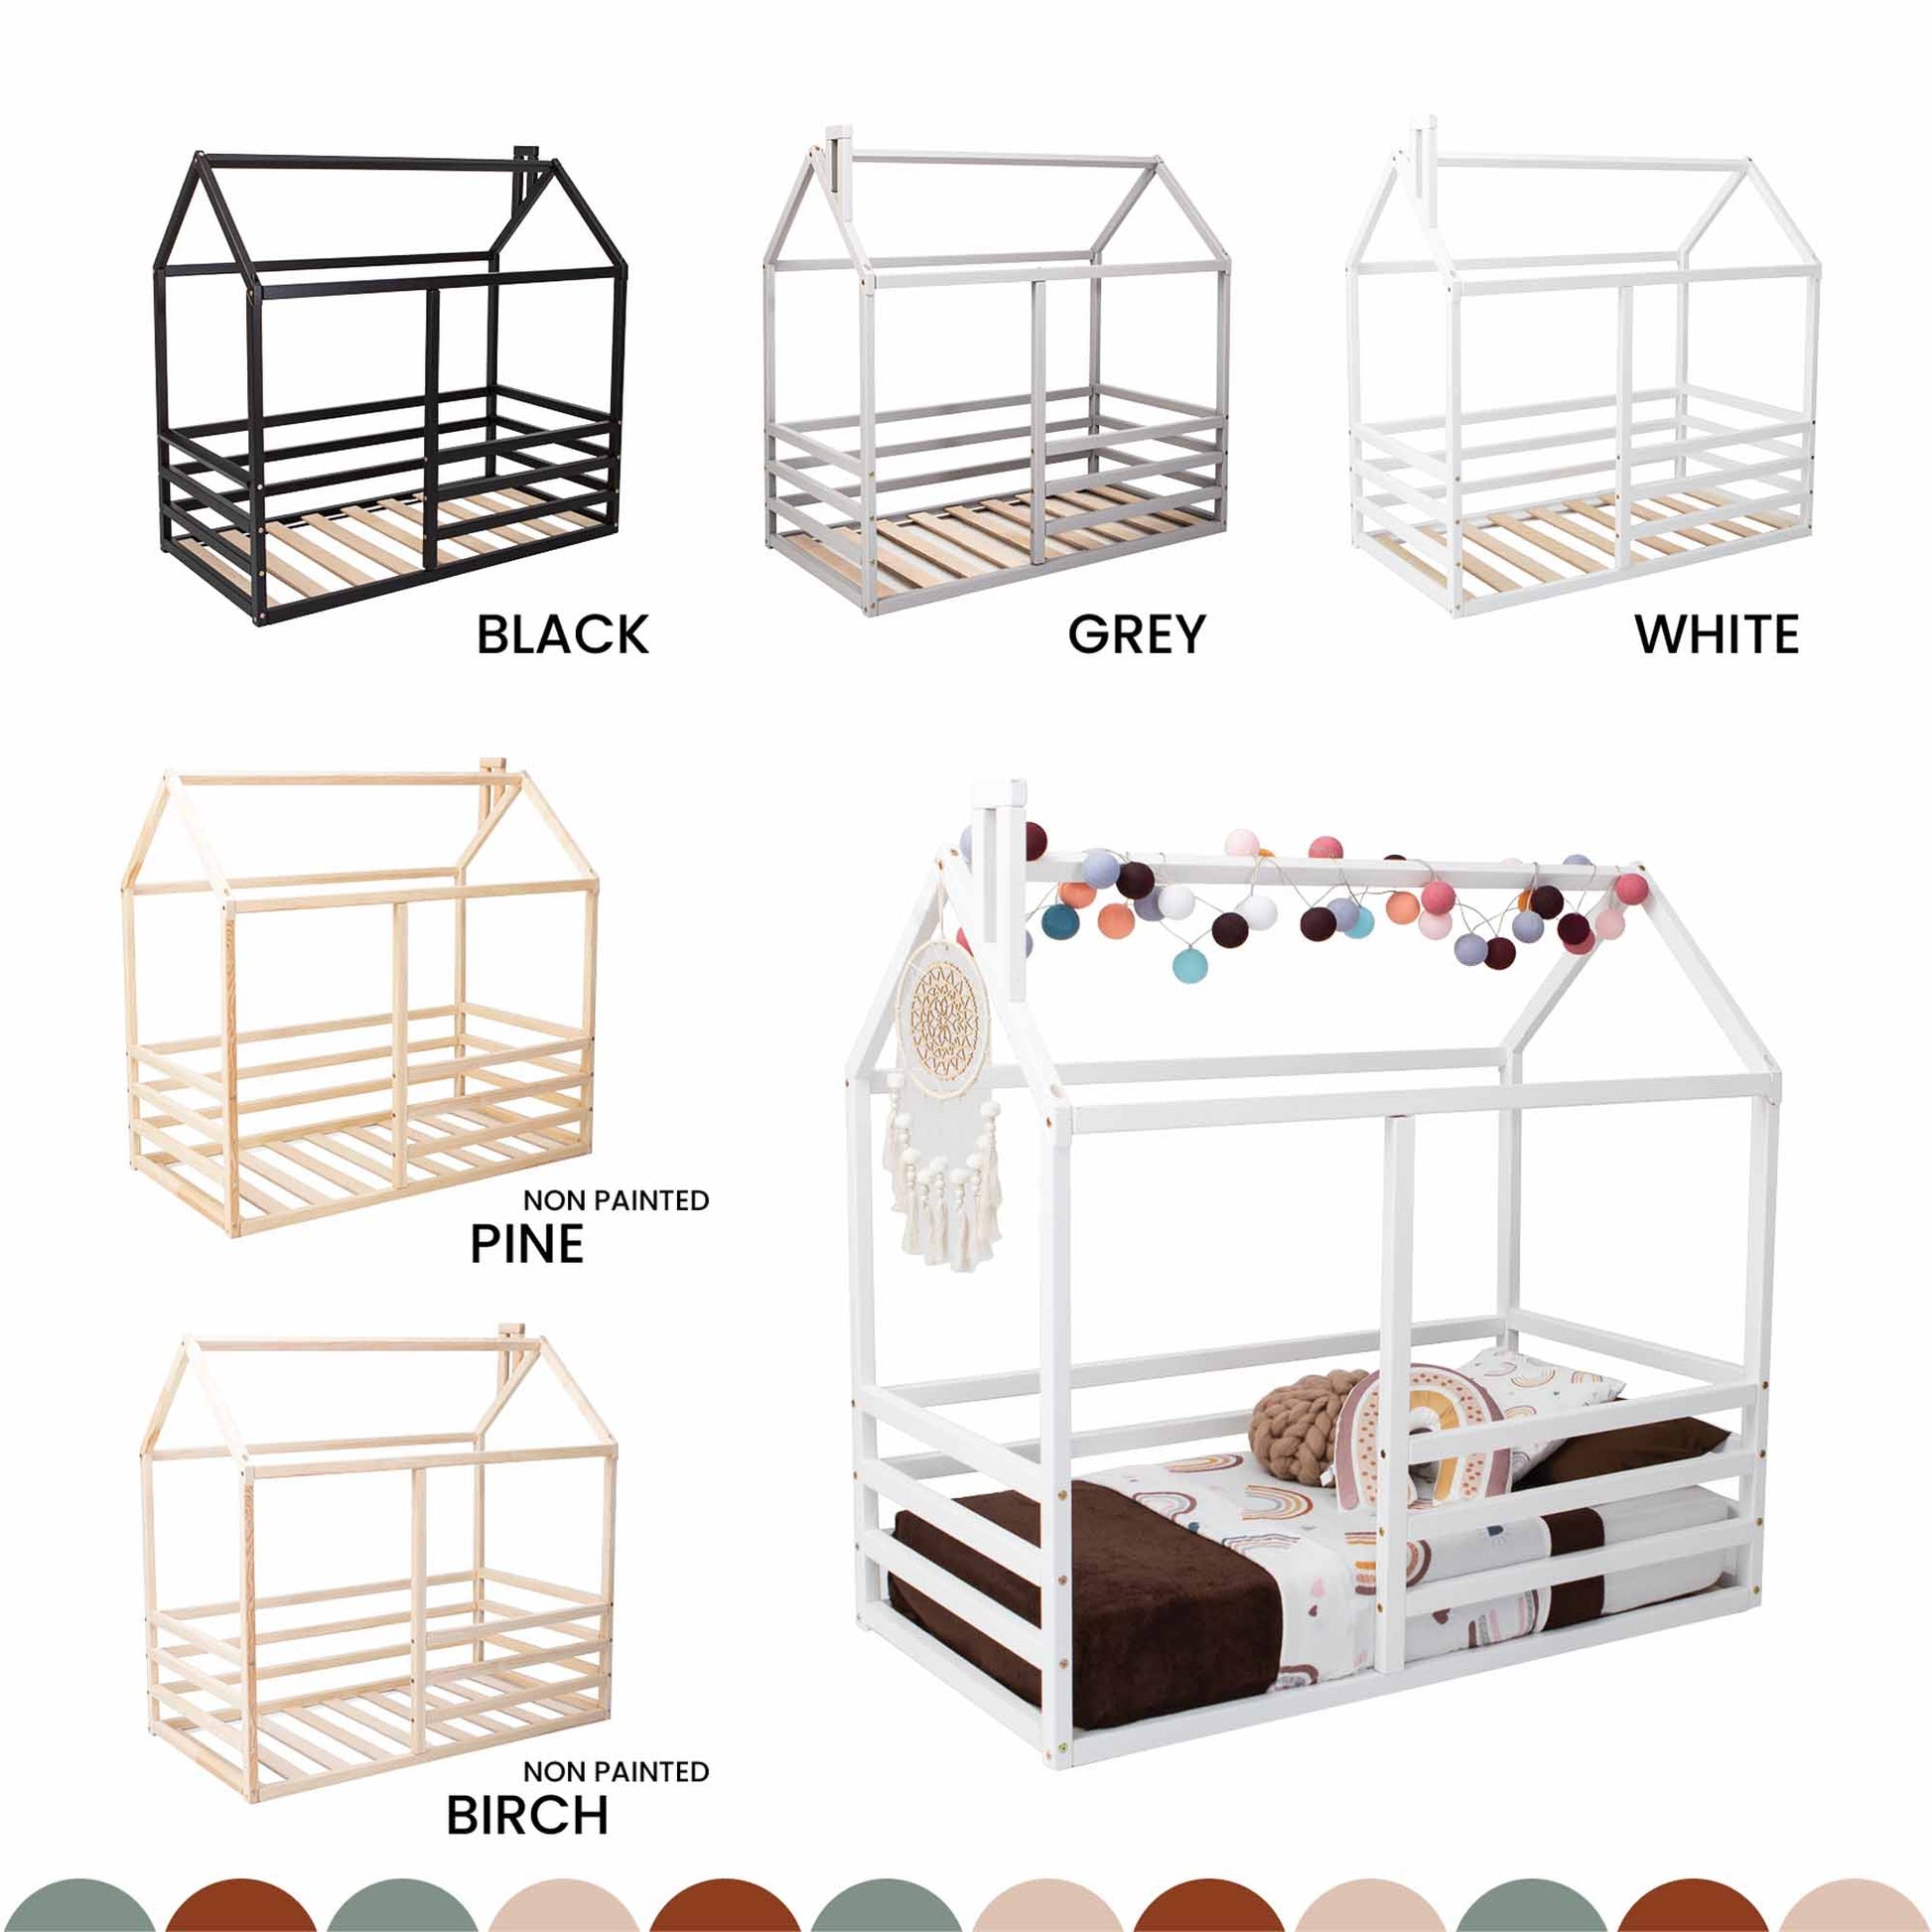 Displays all 5 materials for montessori toddler floor bed-pinewood, birchwood, white, grey, black